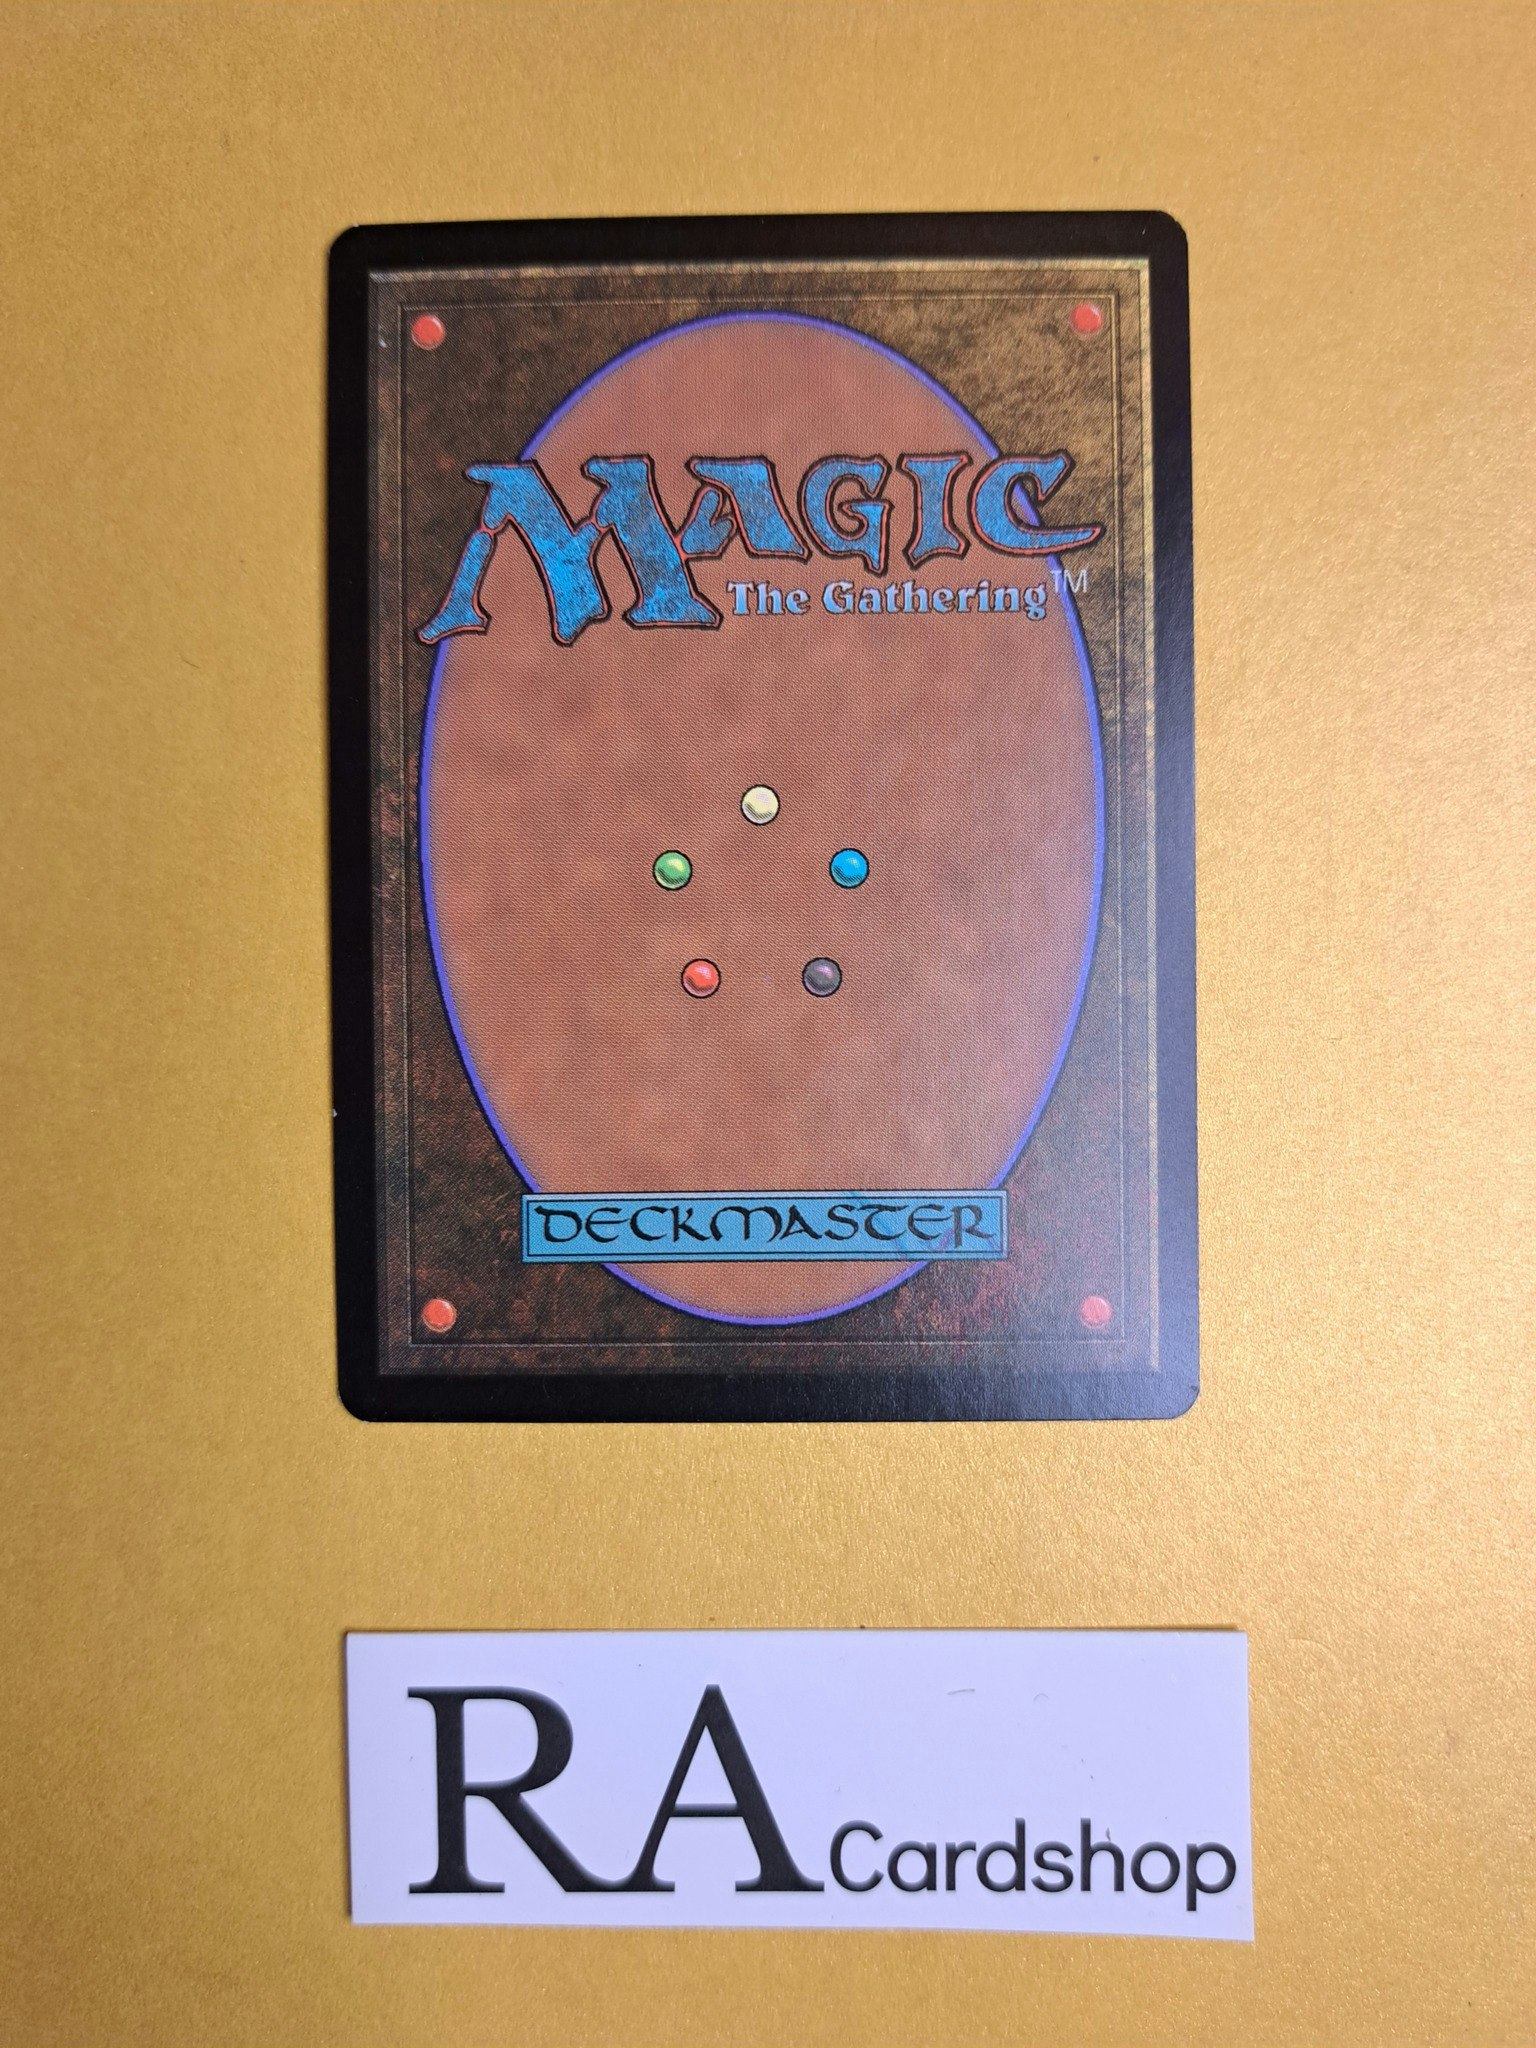 Blade Instructor Common 001/259 Guilds of Ravnica (GRN) Magic the Gathering